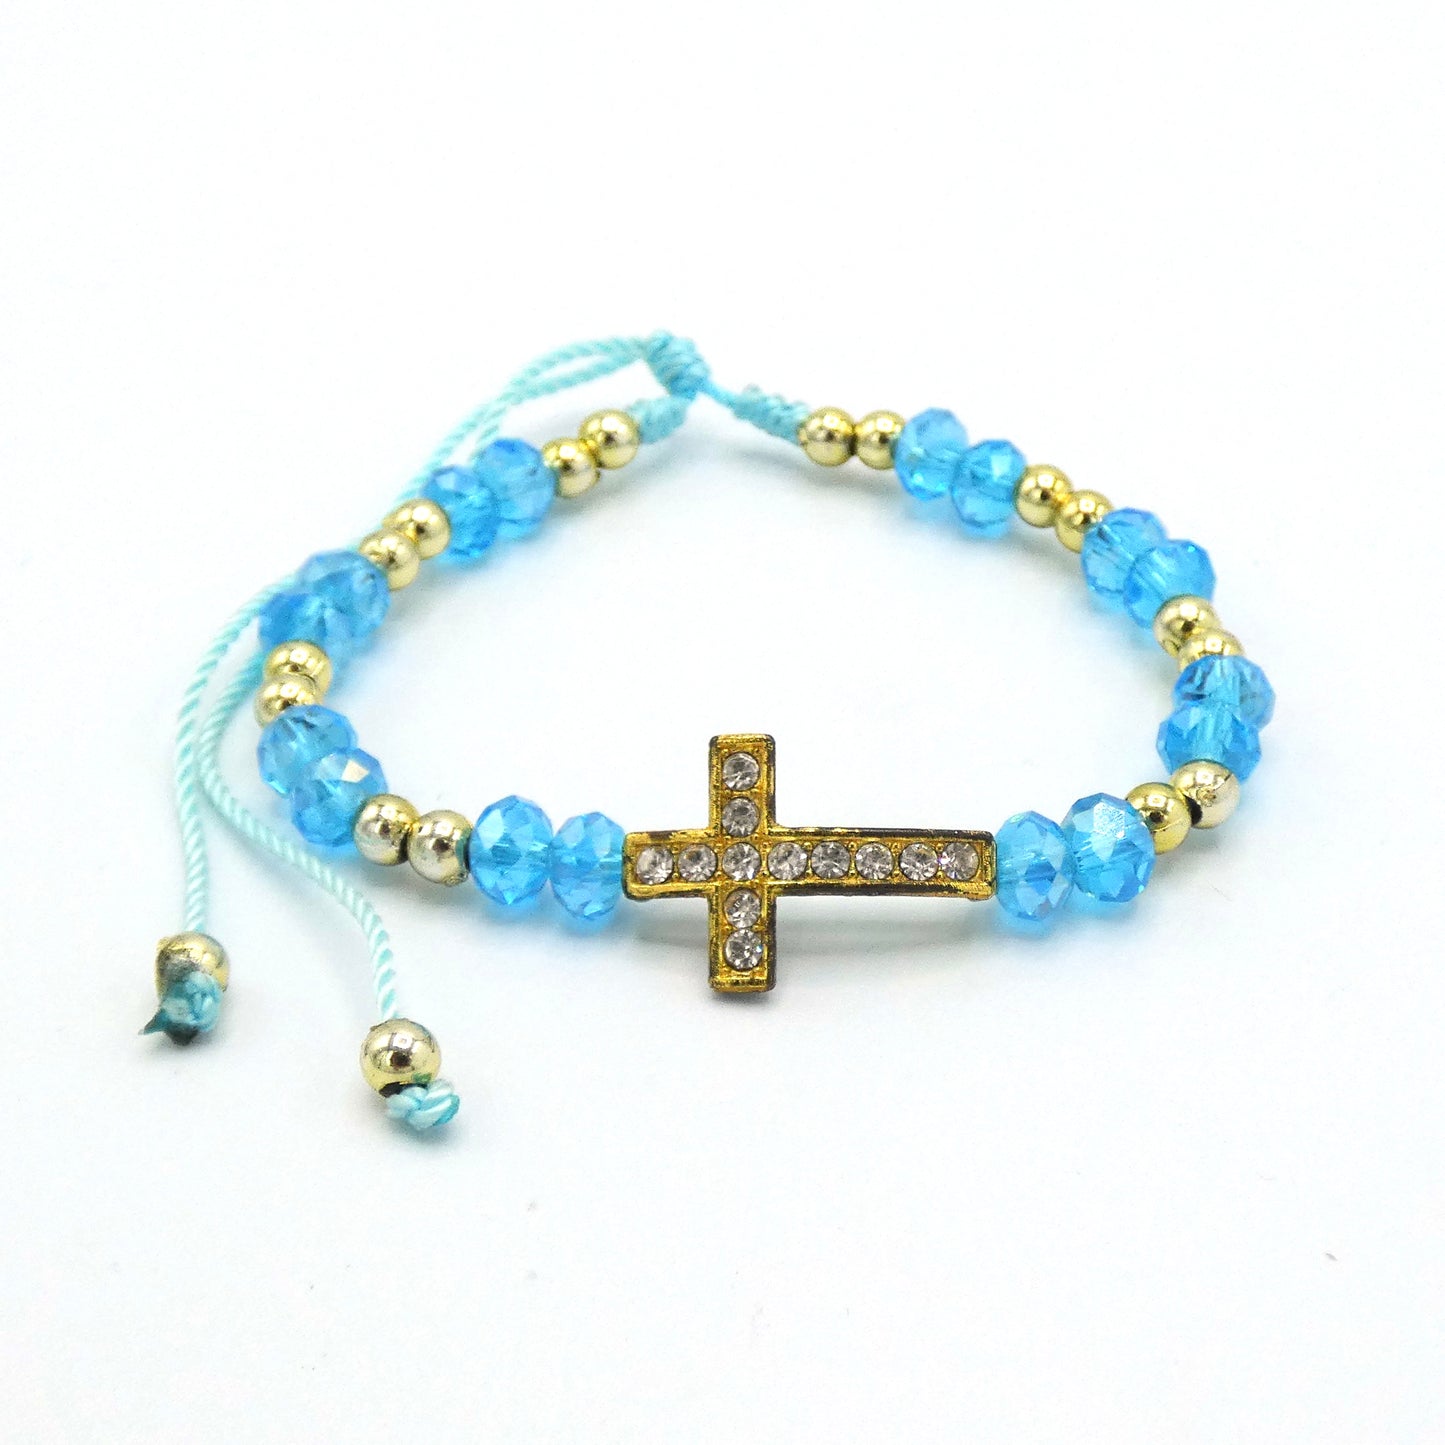 Beaded Bracelet of Assorted Colors with Rhinestone Cross